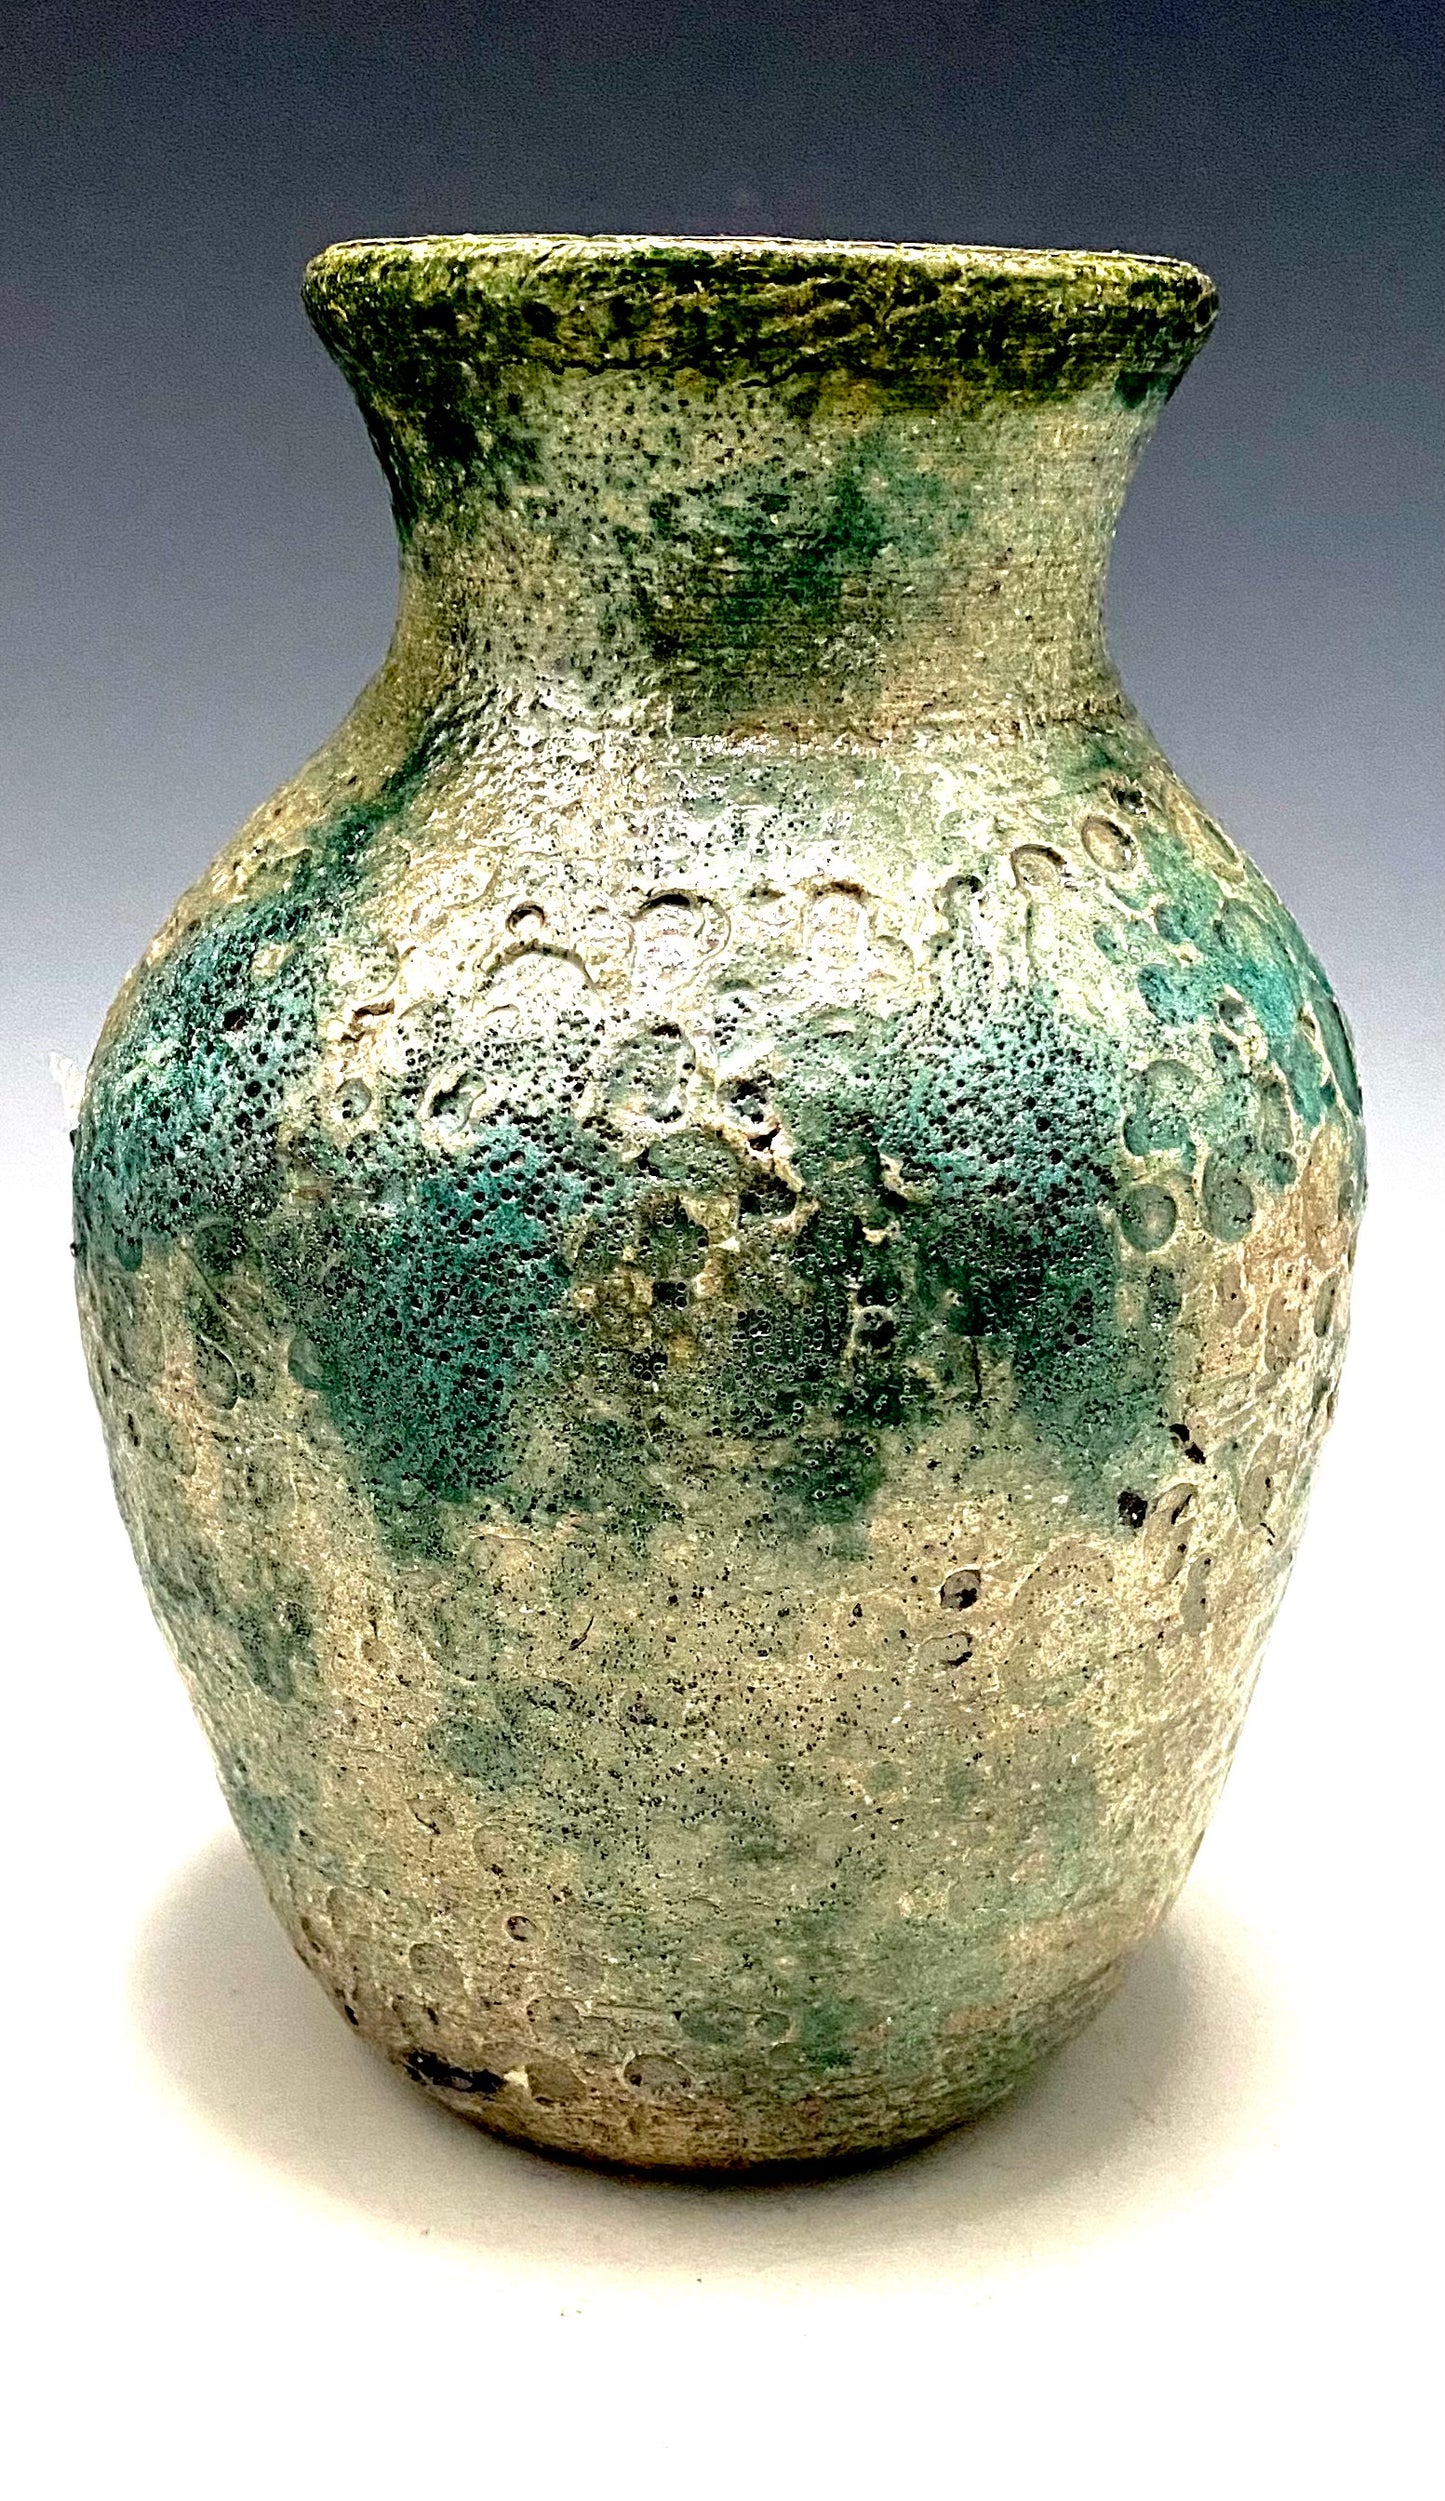 This lovely textured vase  stands 7" x %" x 5" 1.7 lbs Beautiful  moss metallic raku  For decorative purposely only Nice with accessories or stand alone. Got Questions????